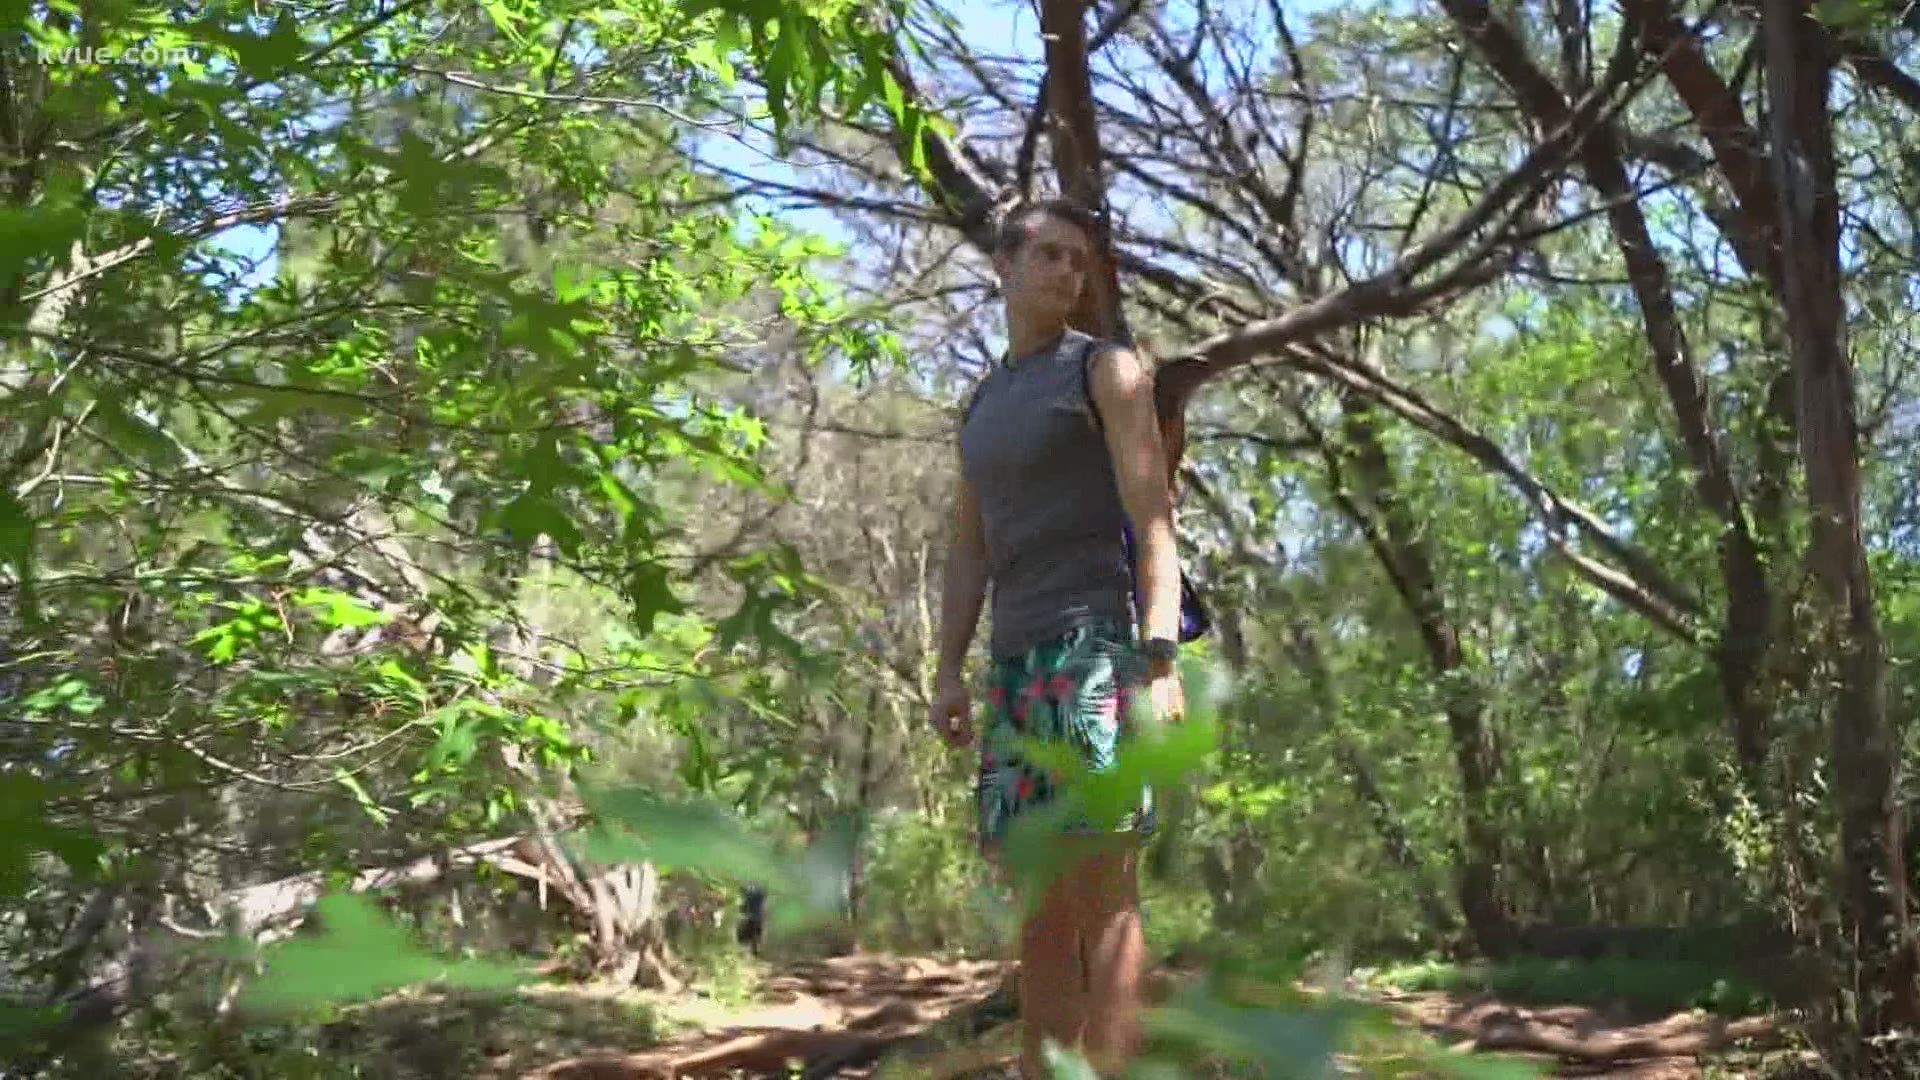 Shane Hinton is taking a hike through the greenbelt in this episode of "The Great Outdoors."